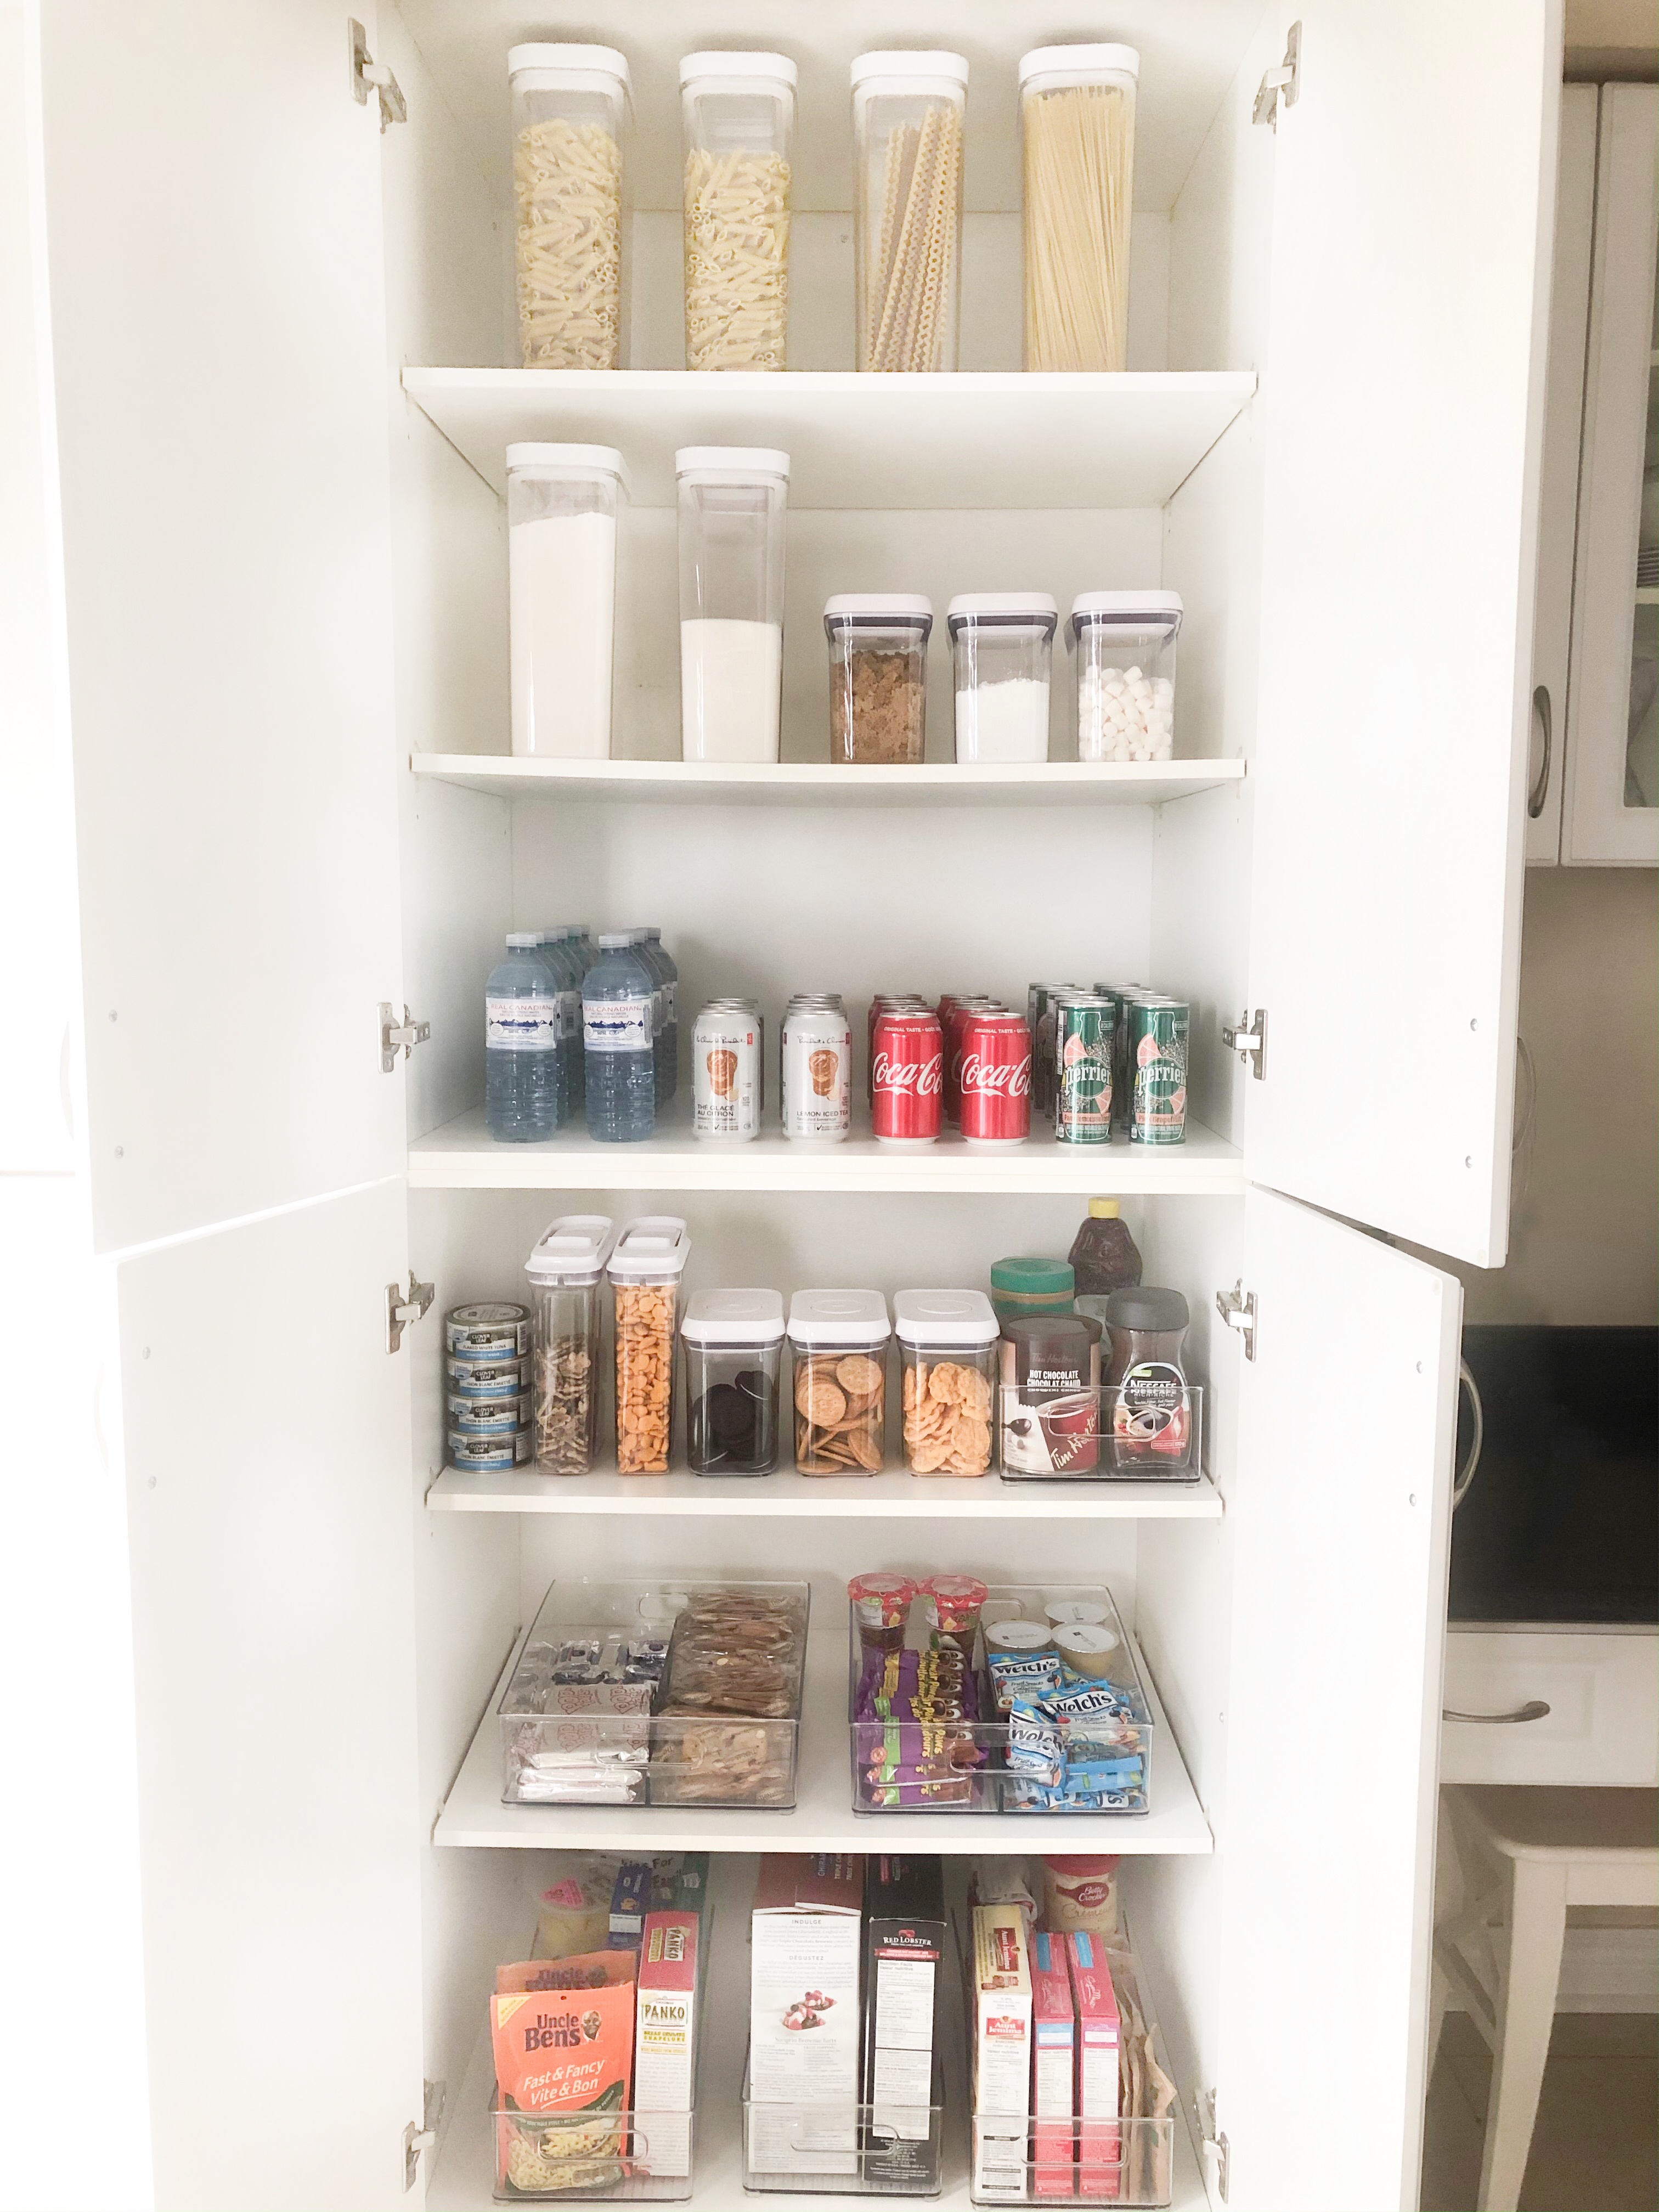 Kitchen Pantry Organization on Livin' Life with Style(After)